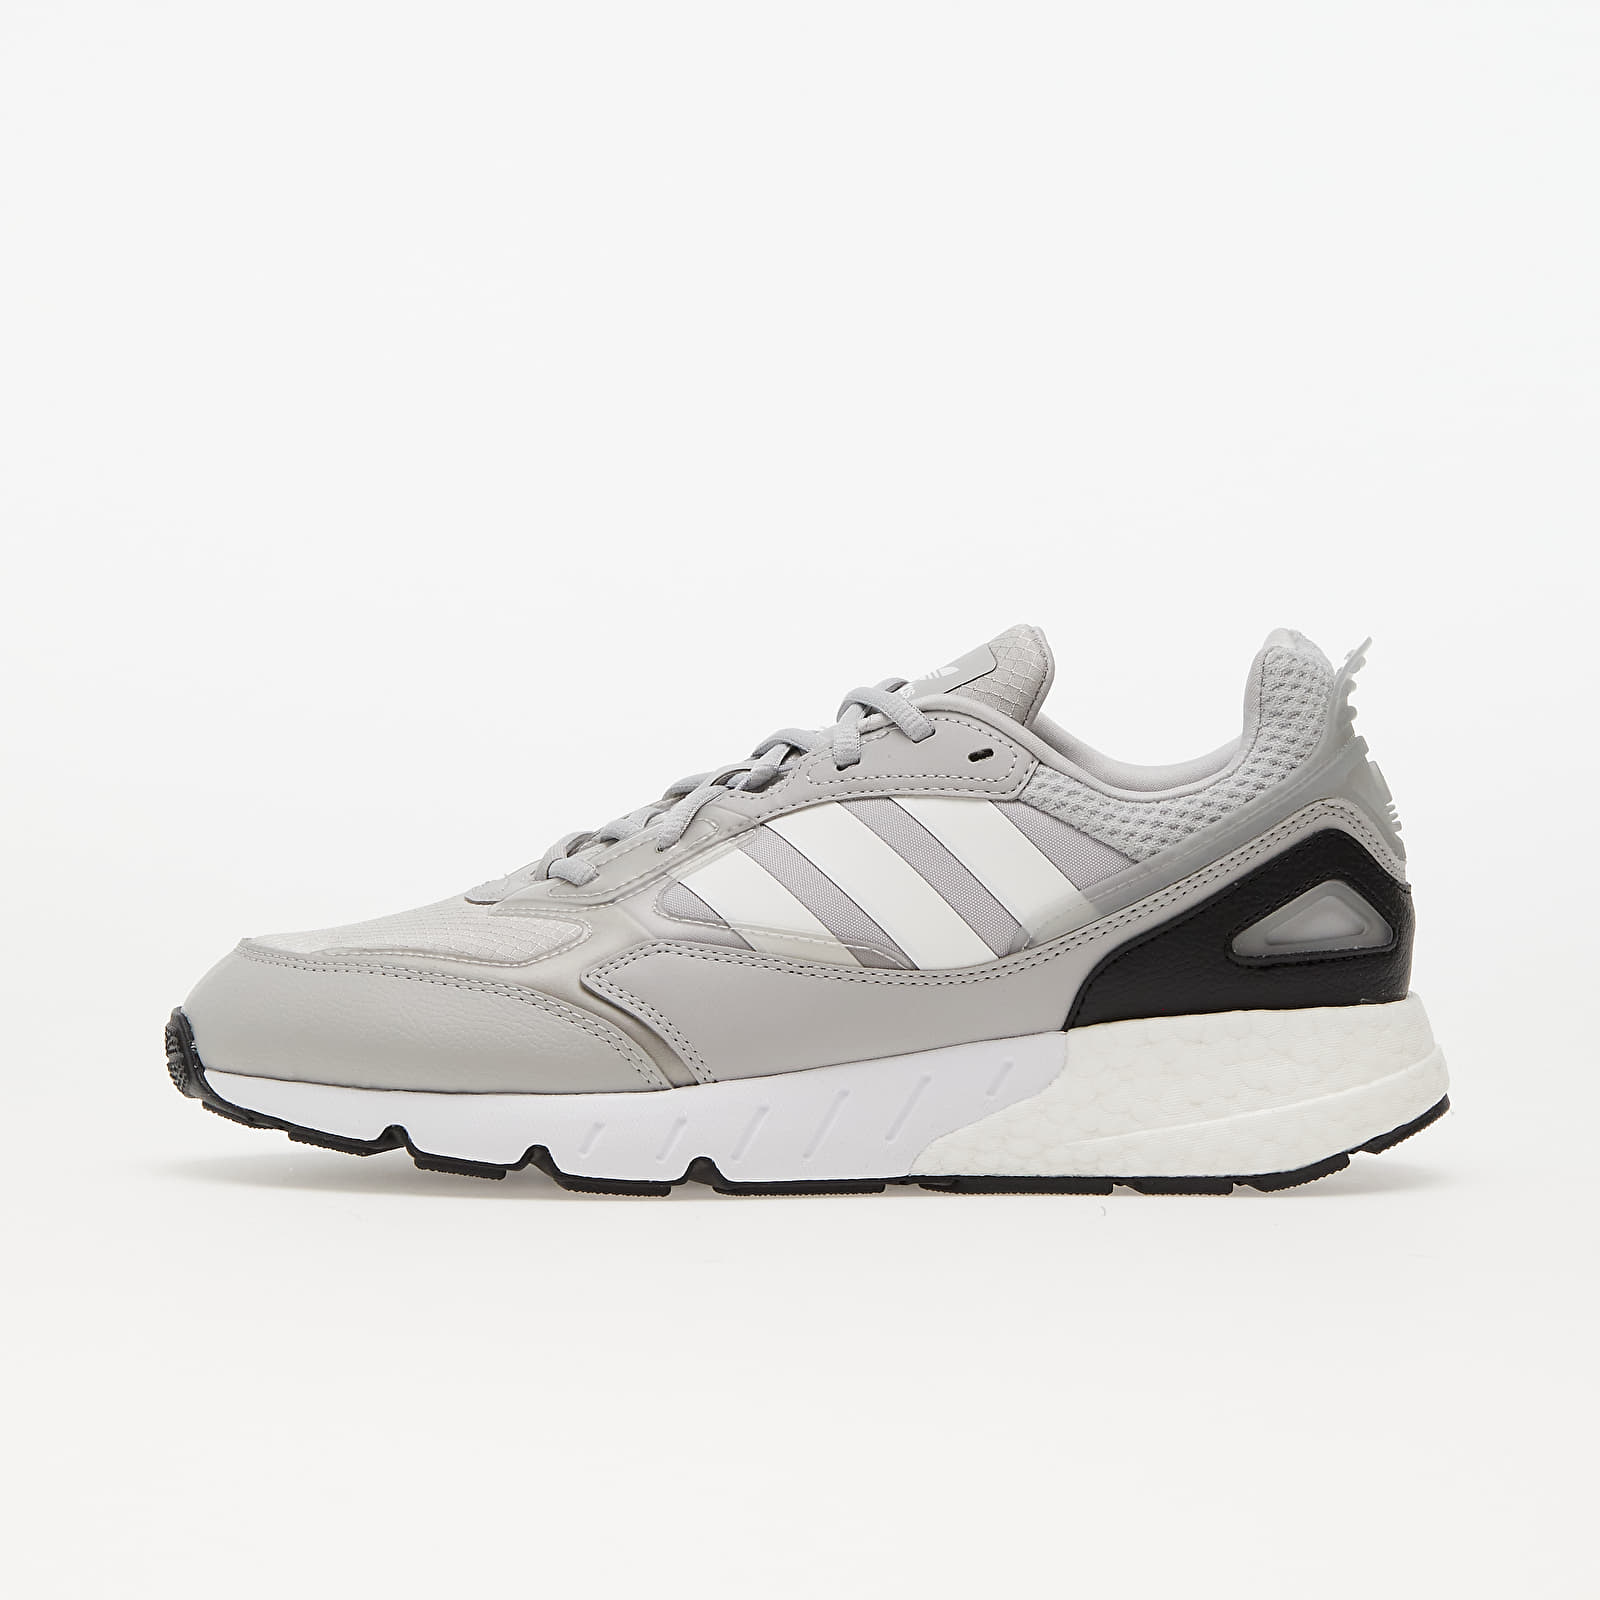 Men's shoes adidas ZX 1K BOOST 2.0 Grey Two/ Ftw White/ Core Black